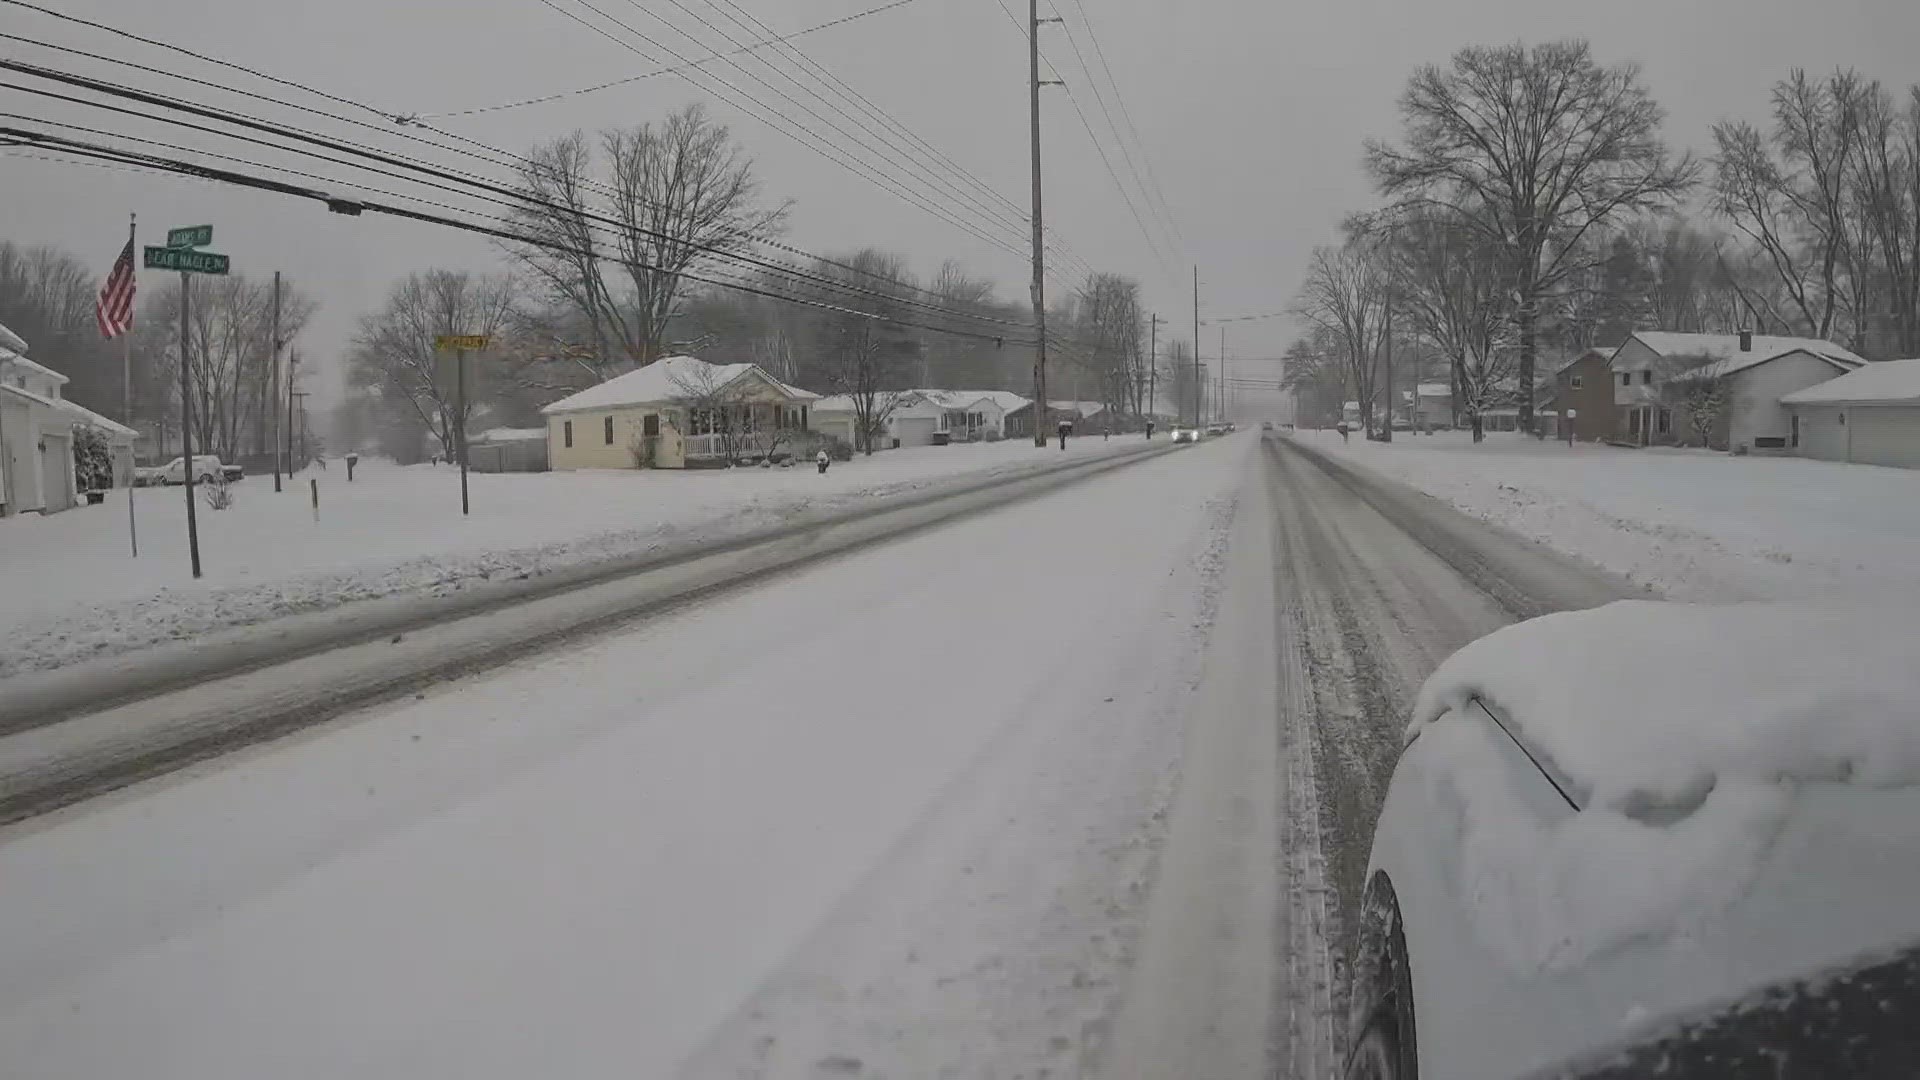 According to experts, you may want to rethink the '10 and 2' method when the roads are slick.